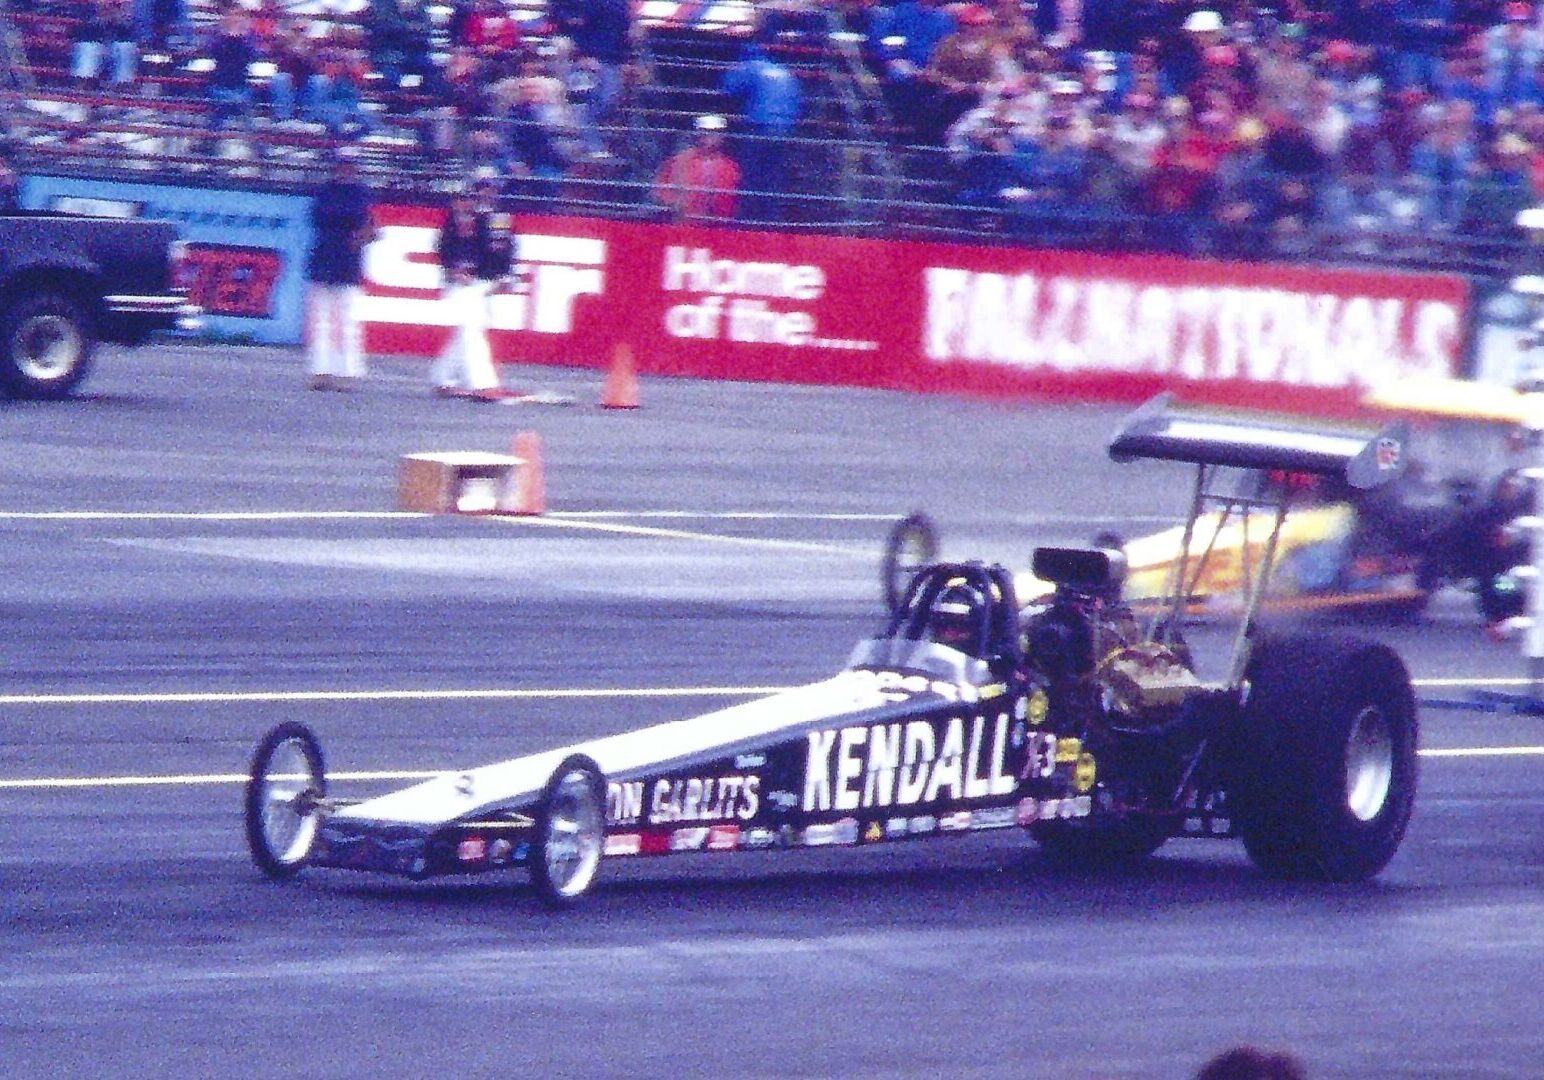 A man participating in drag racing, showcasing his skills and speed in front of a excited crowd.